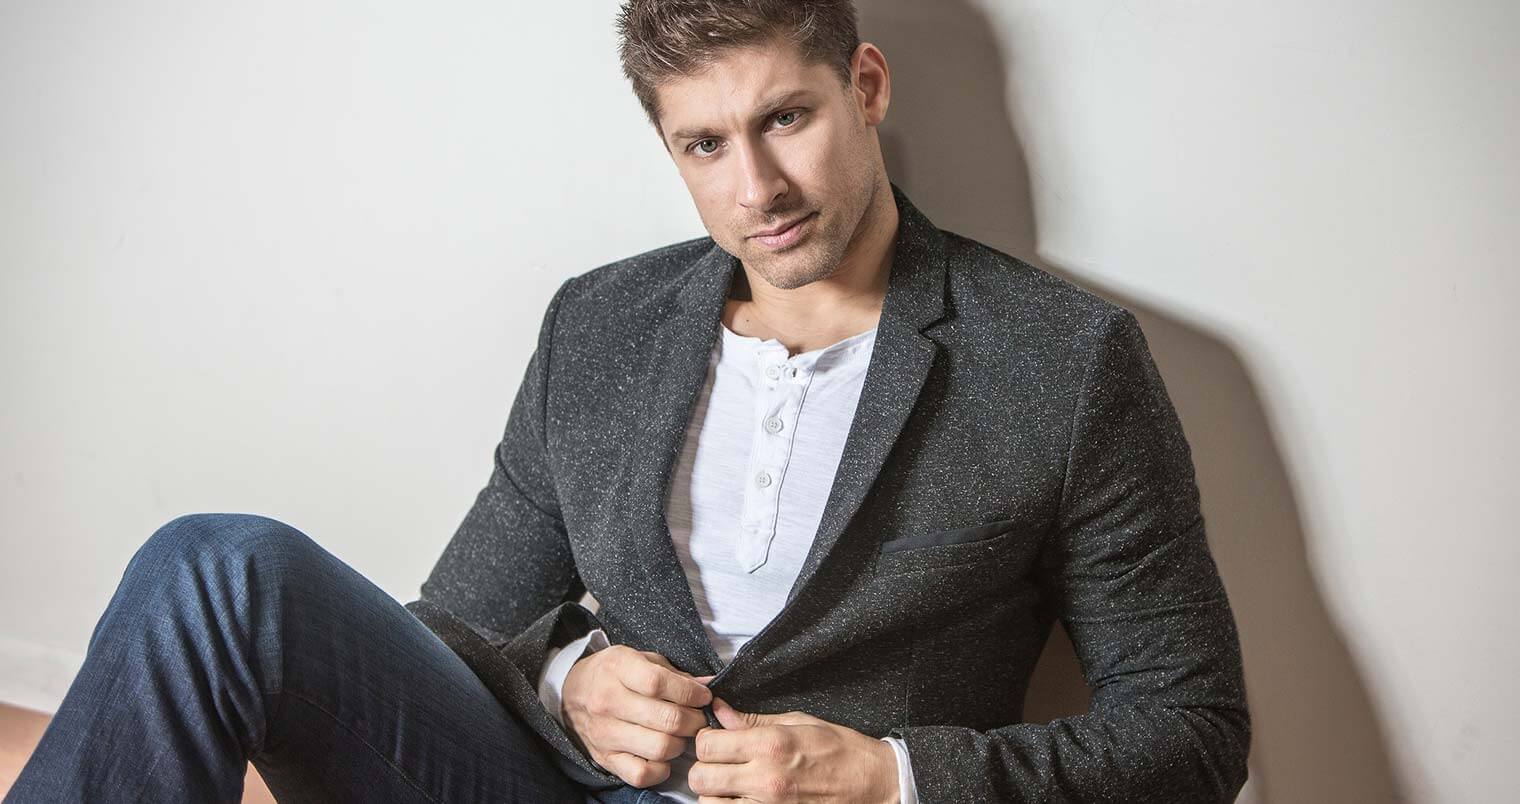 Chillin' with Alain Moussi, sitting in jeans and sport coat, featured image